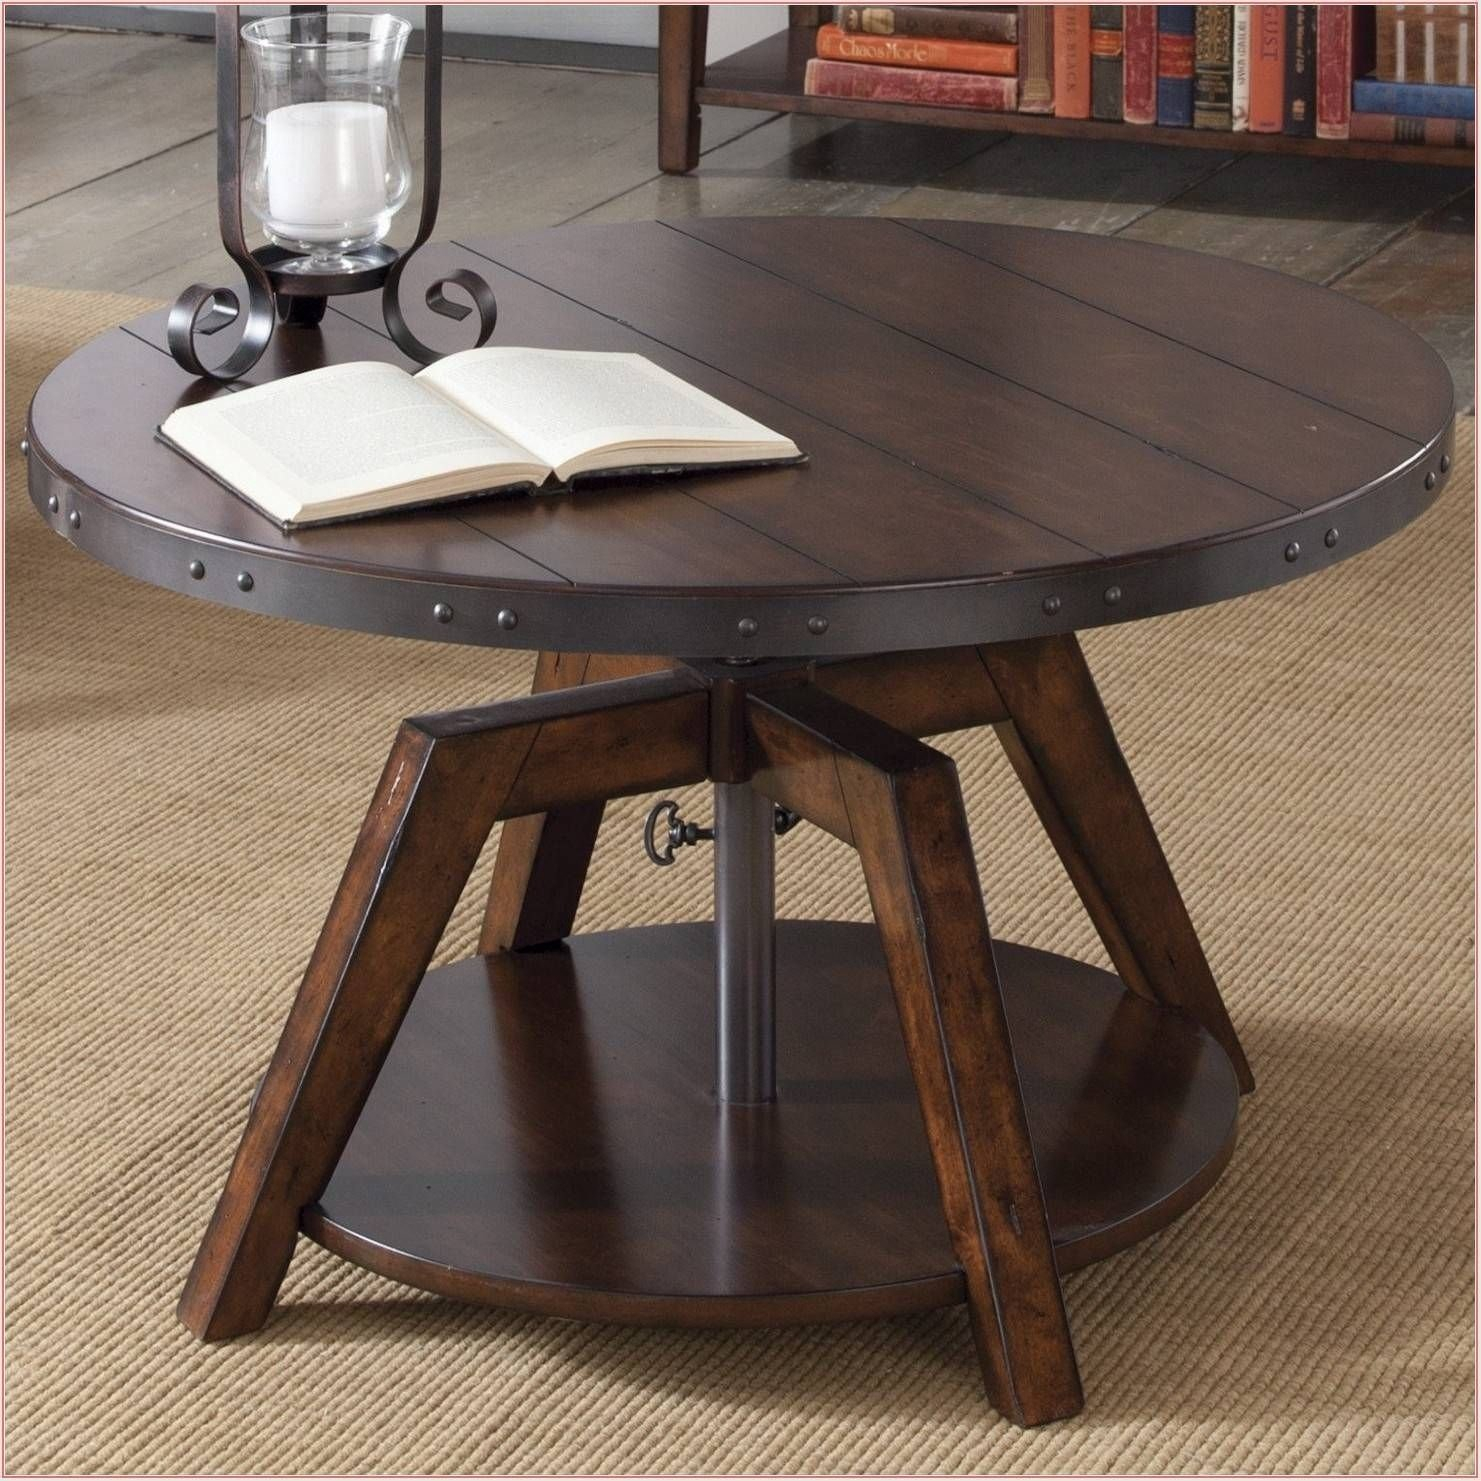 50 Amazing Convertible Coffee Table To Dining Table Up To 70 Off within size 1481 X 1481